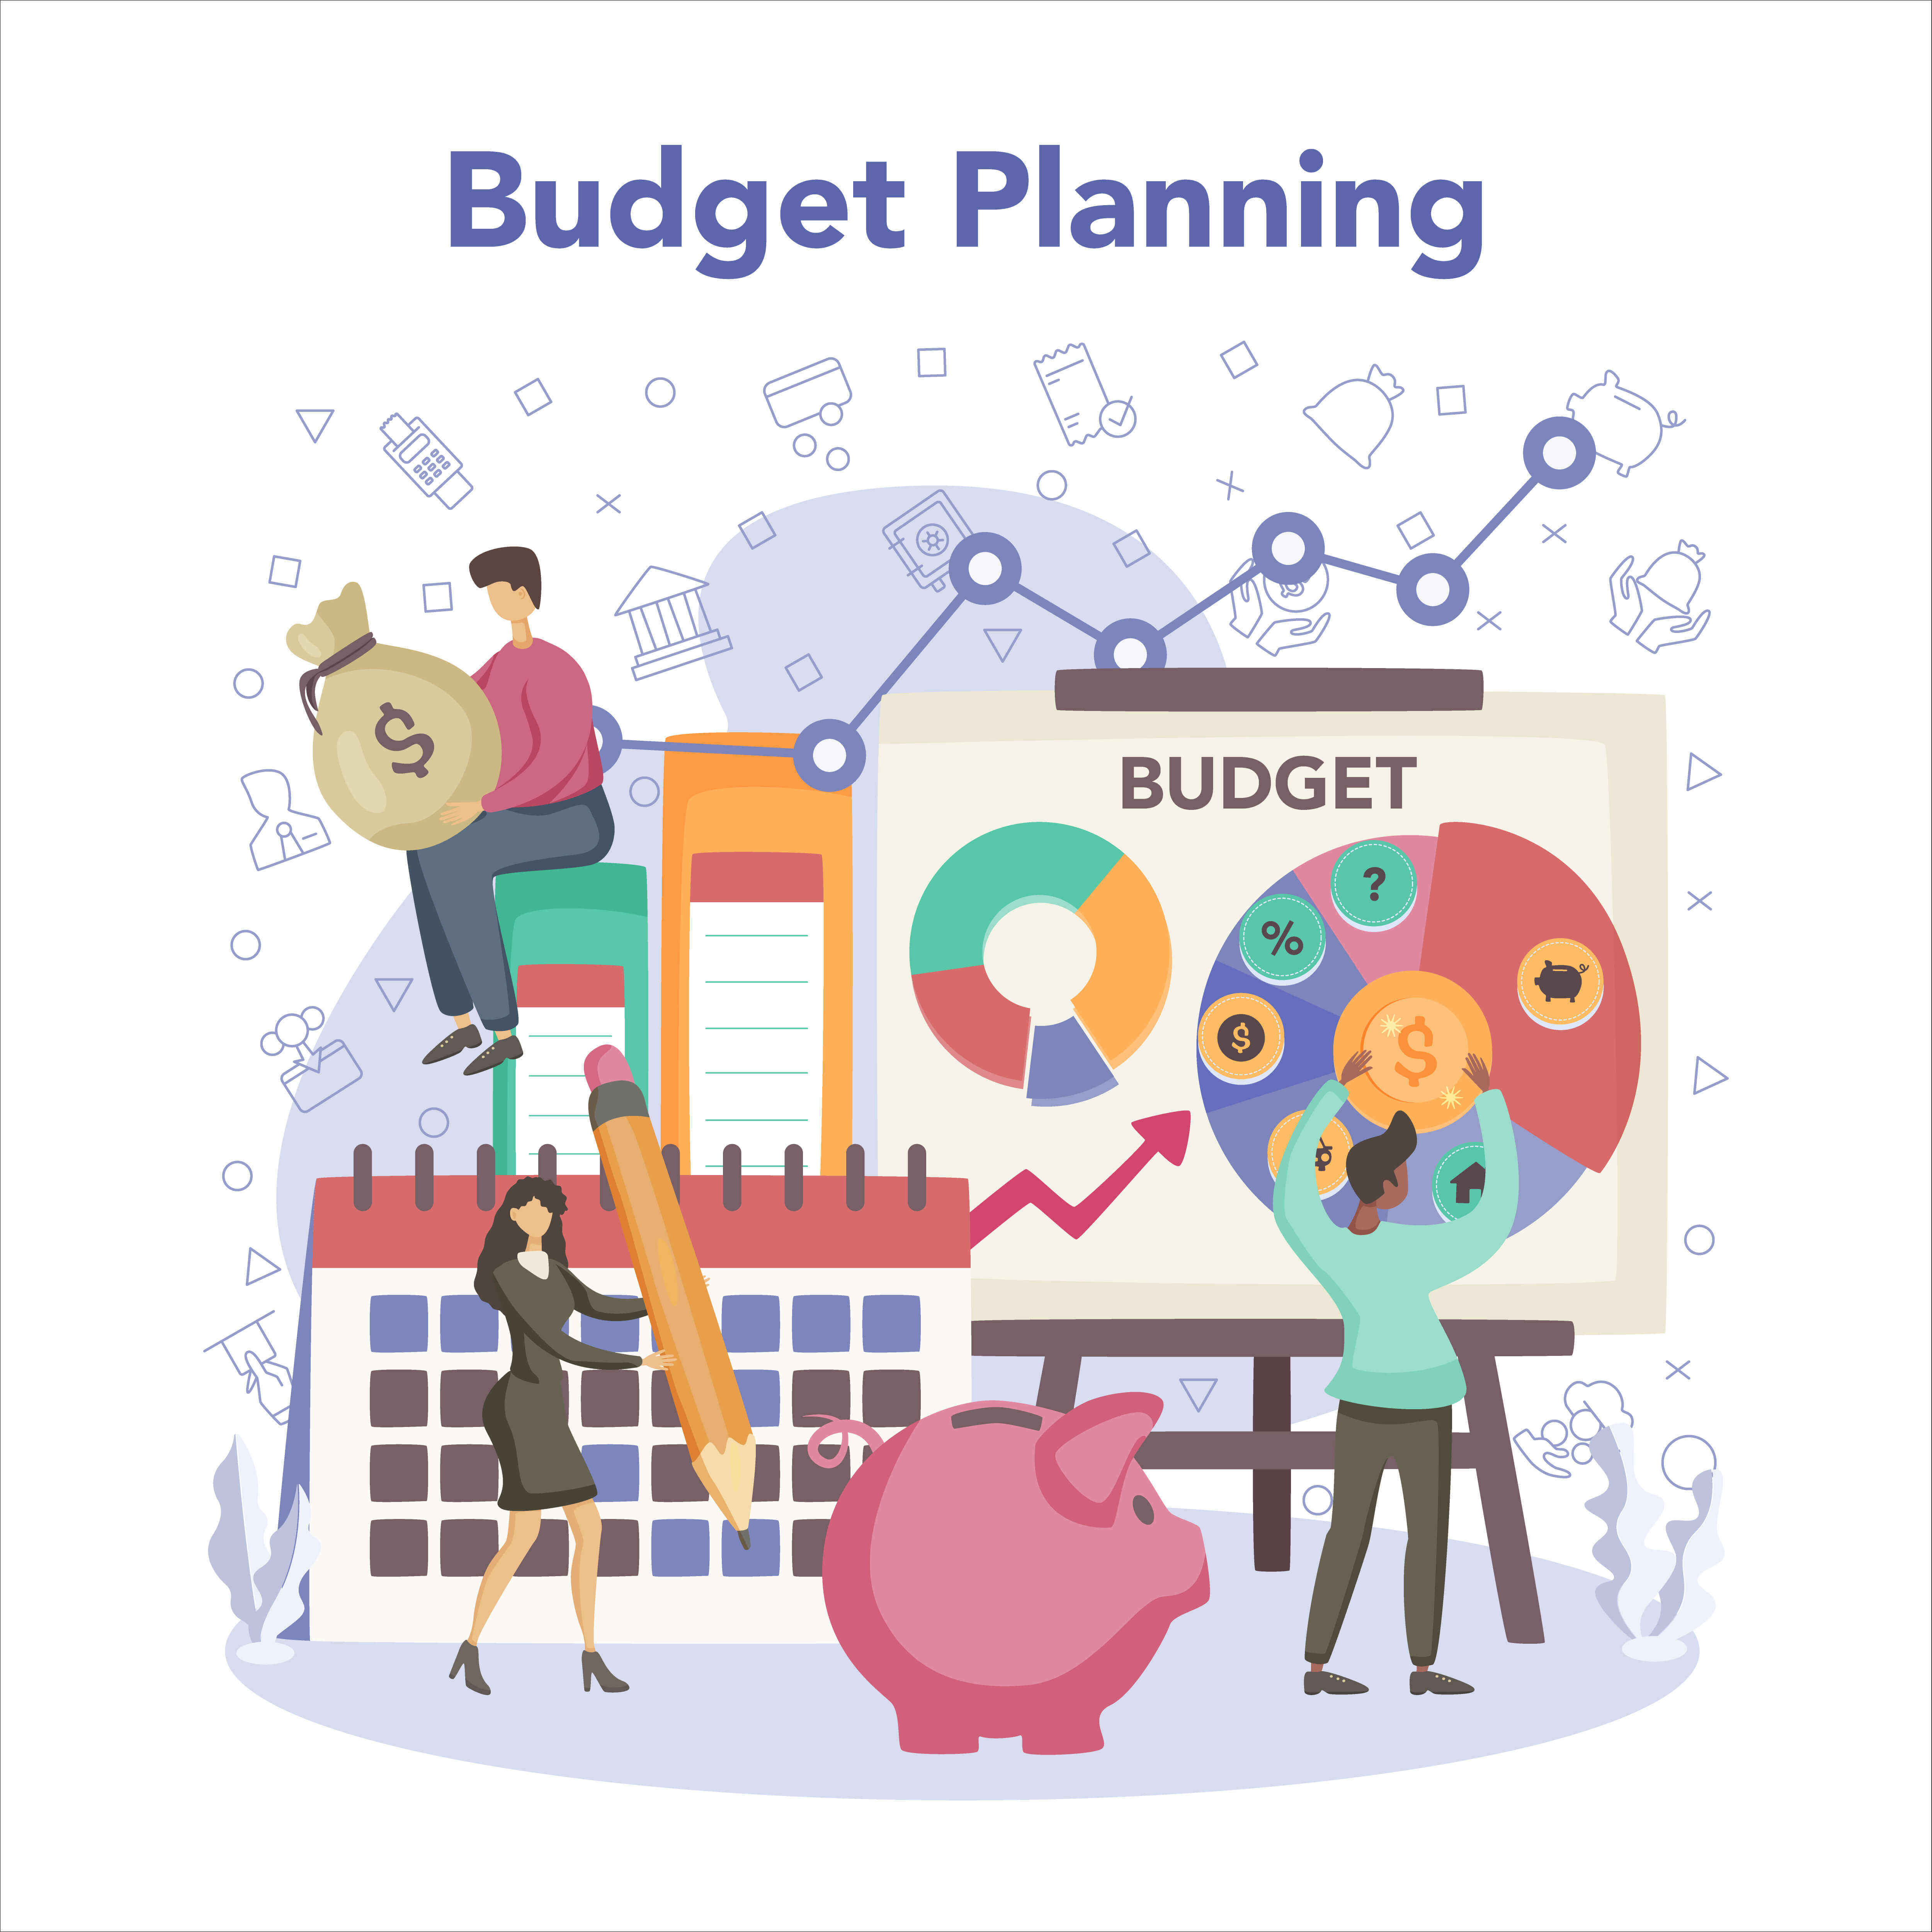 Budget planning with a graph and calendar